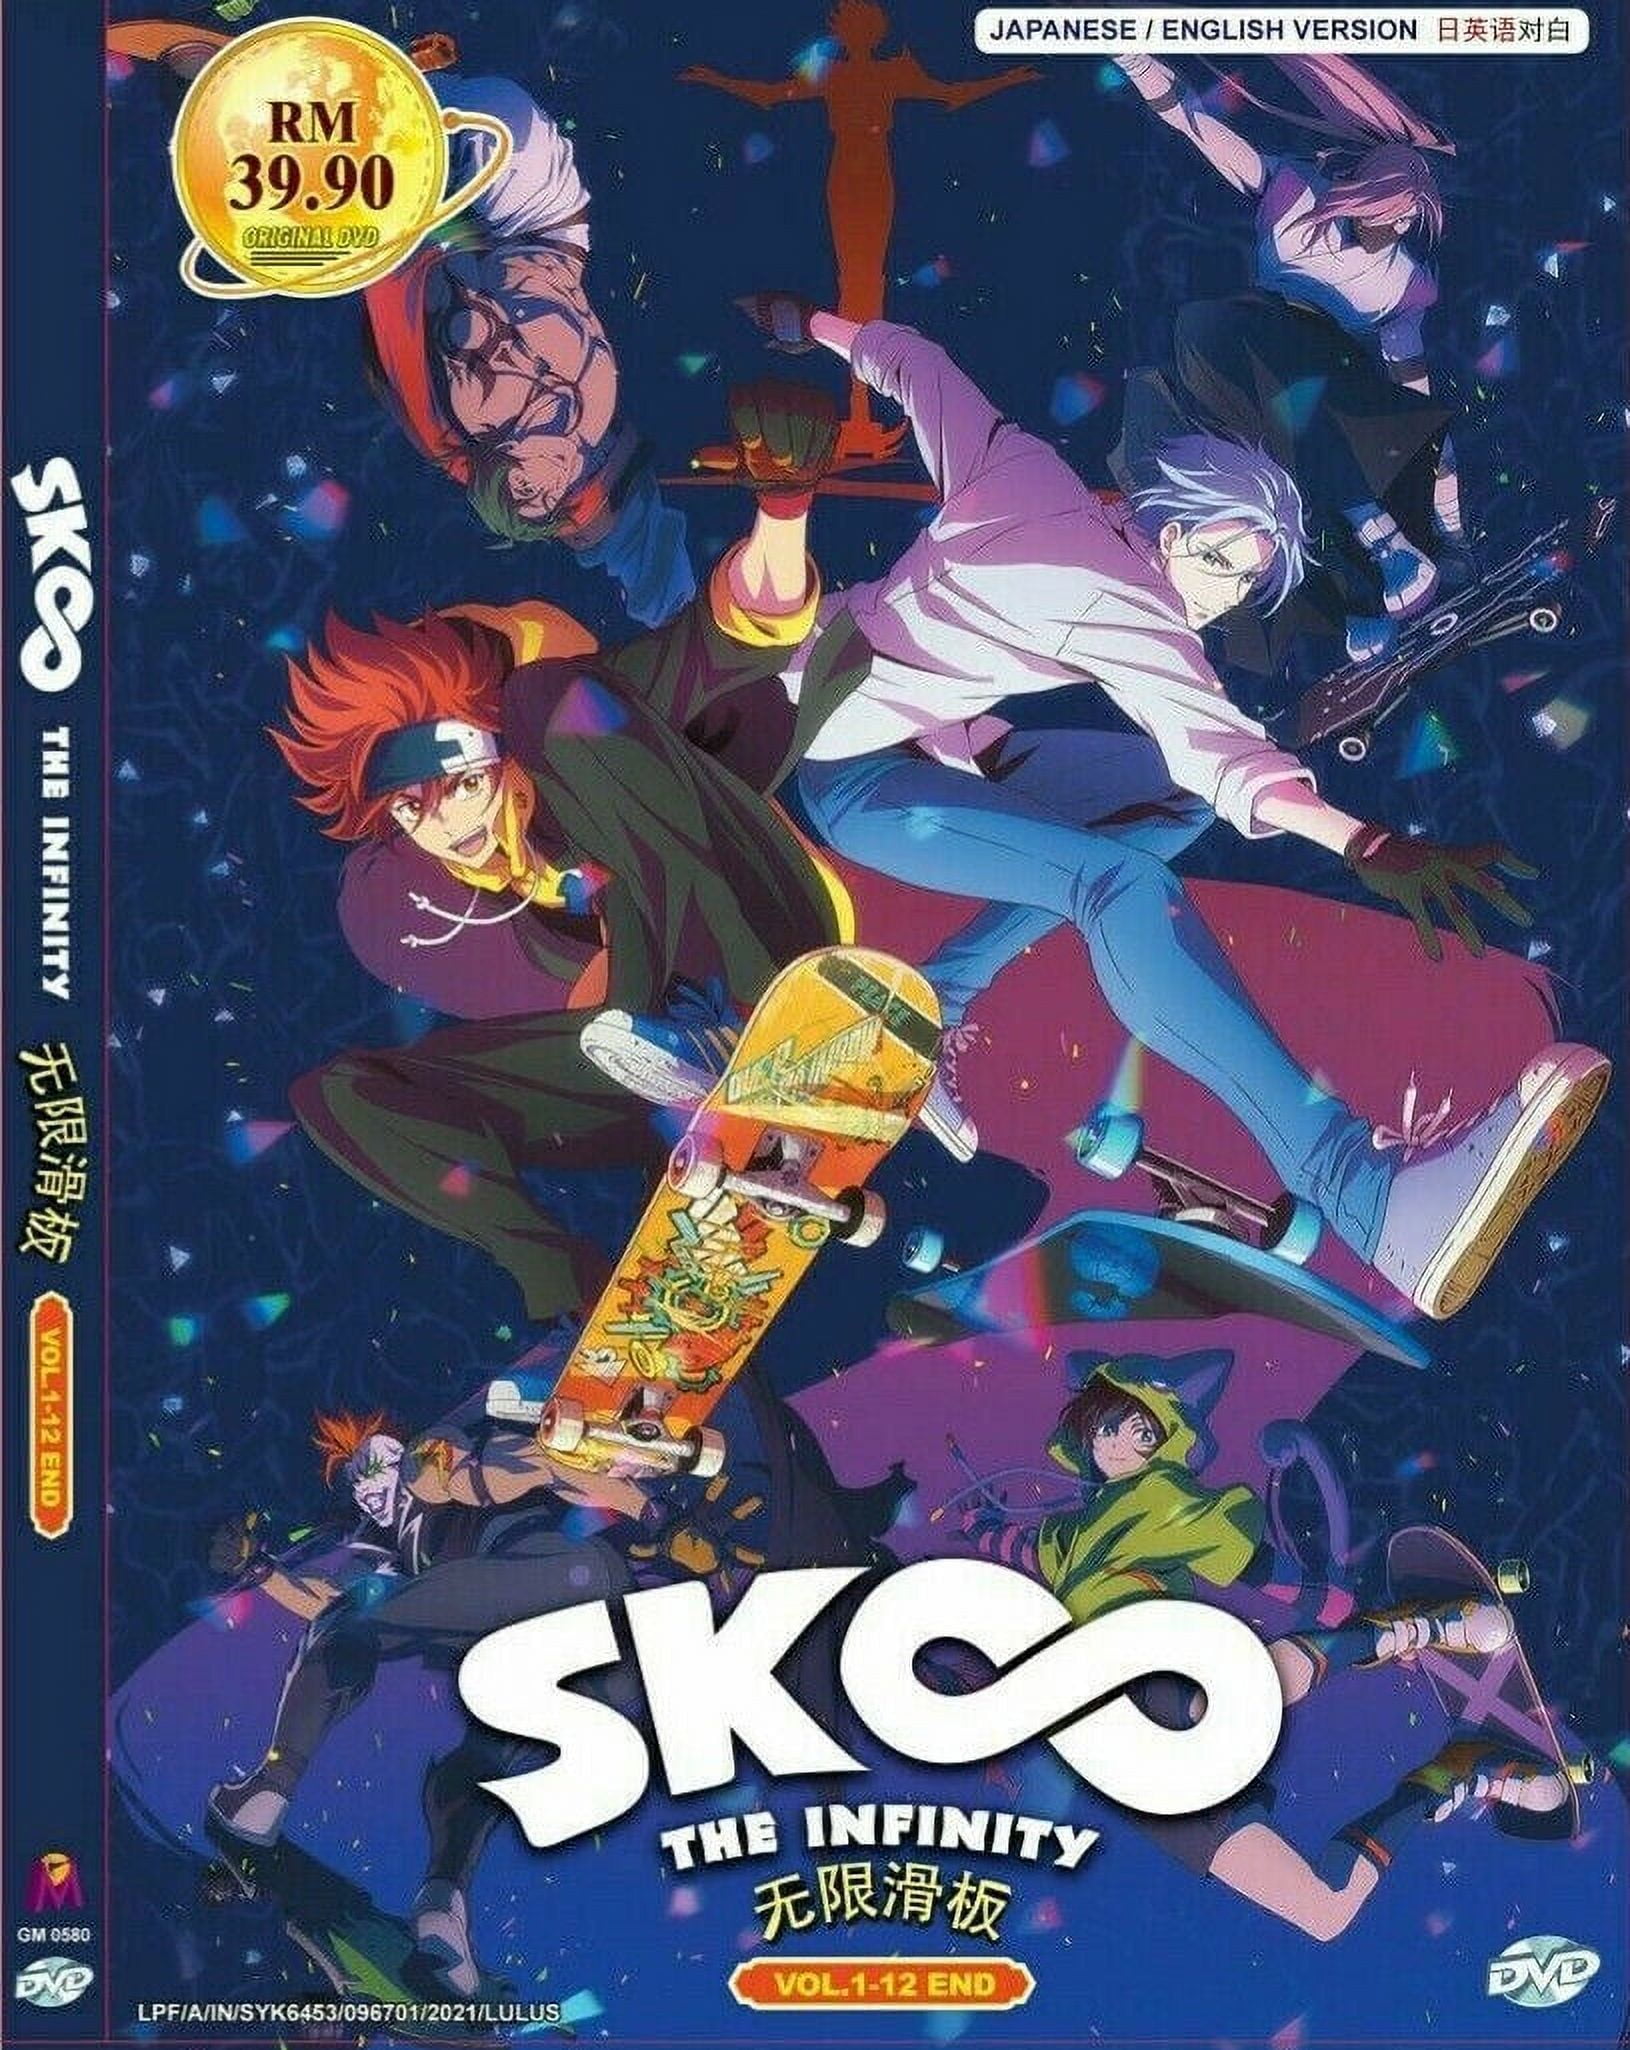 SK∞ The Infinity Anime DVD (Vol.1-12 end) with English Dubbed - Walmart.com